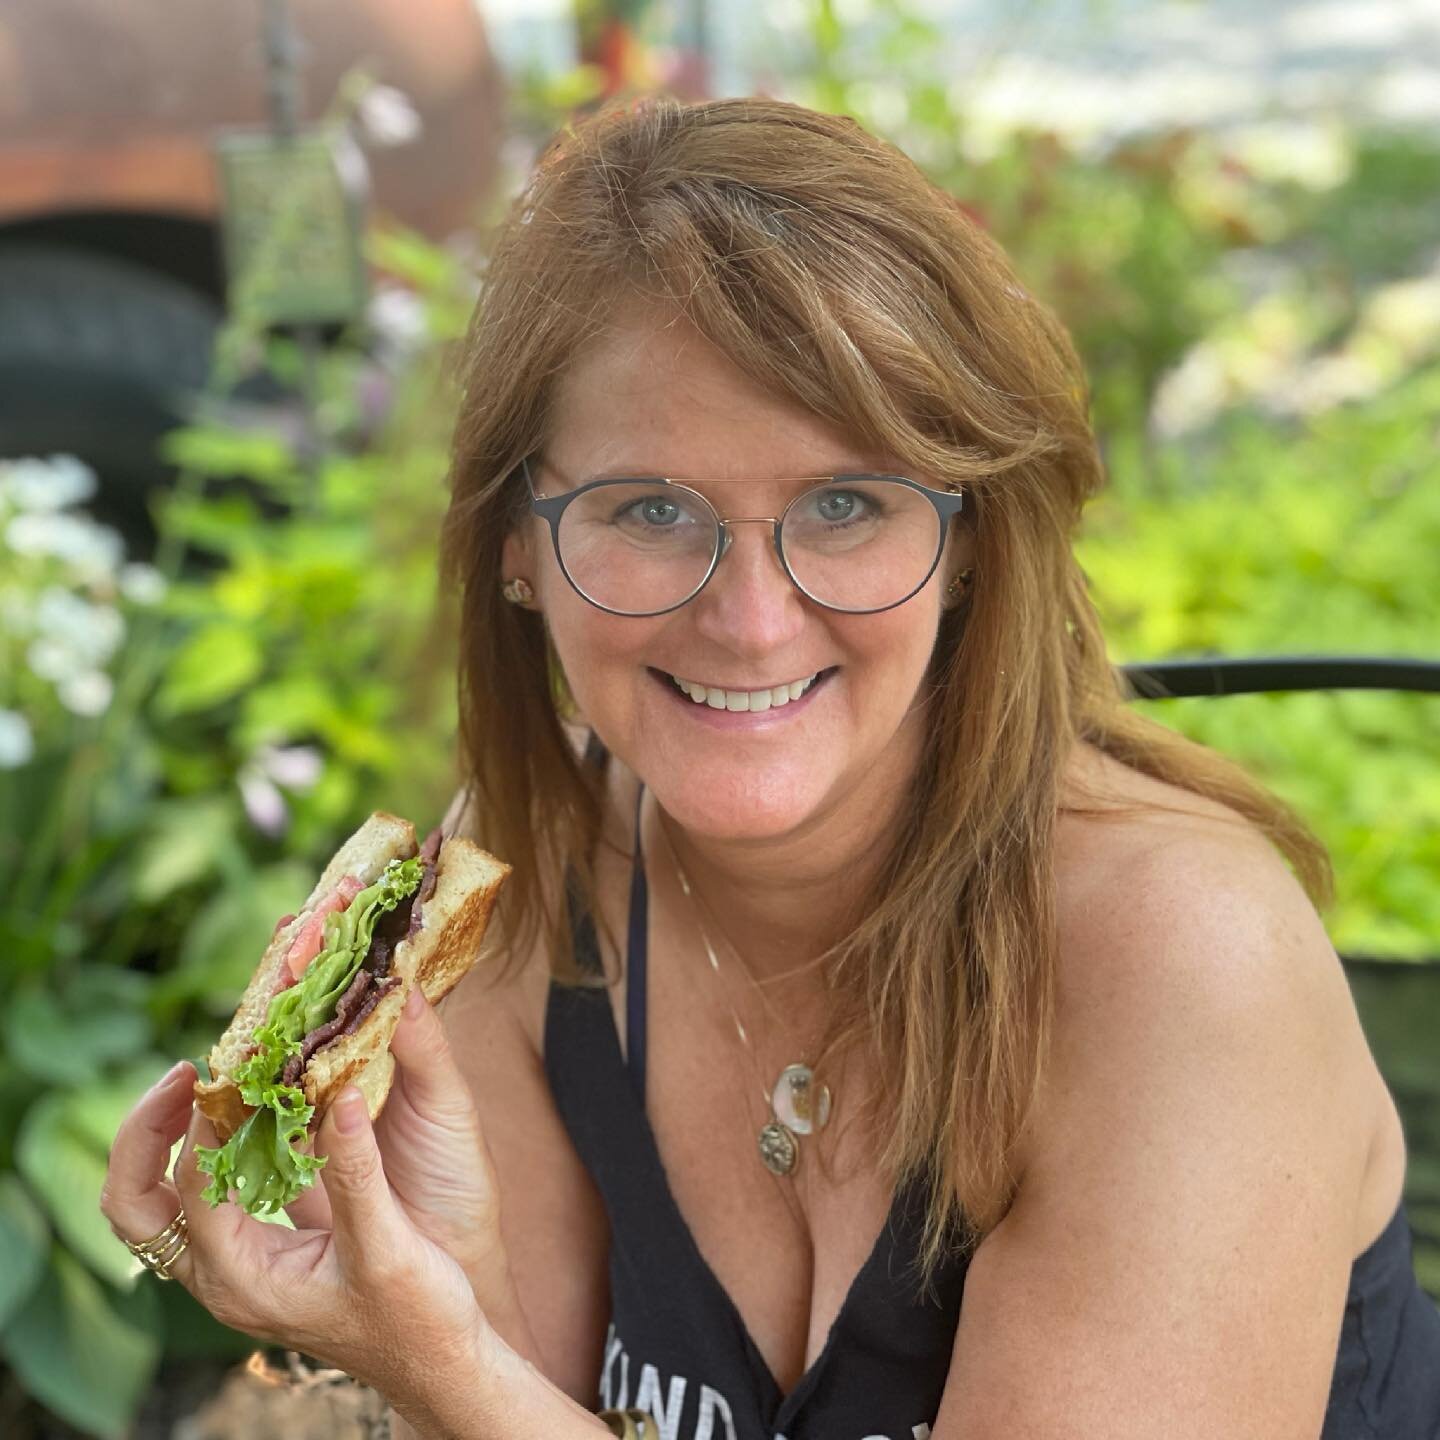 BLT from The Southern Standard at Me and McGee Market after getting the best heirloom tomatoes, sweet corn &amp; watermelon. I really miss my mom this time of year with pool parties &amp; strong pour cocktails. #GingerAdventures #CancerCanSuckIt